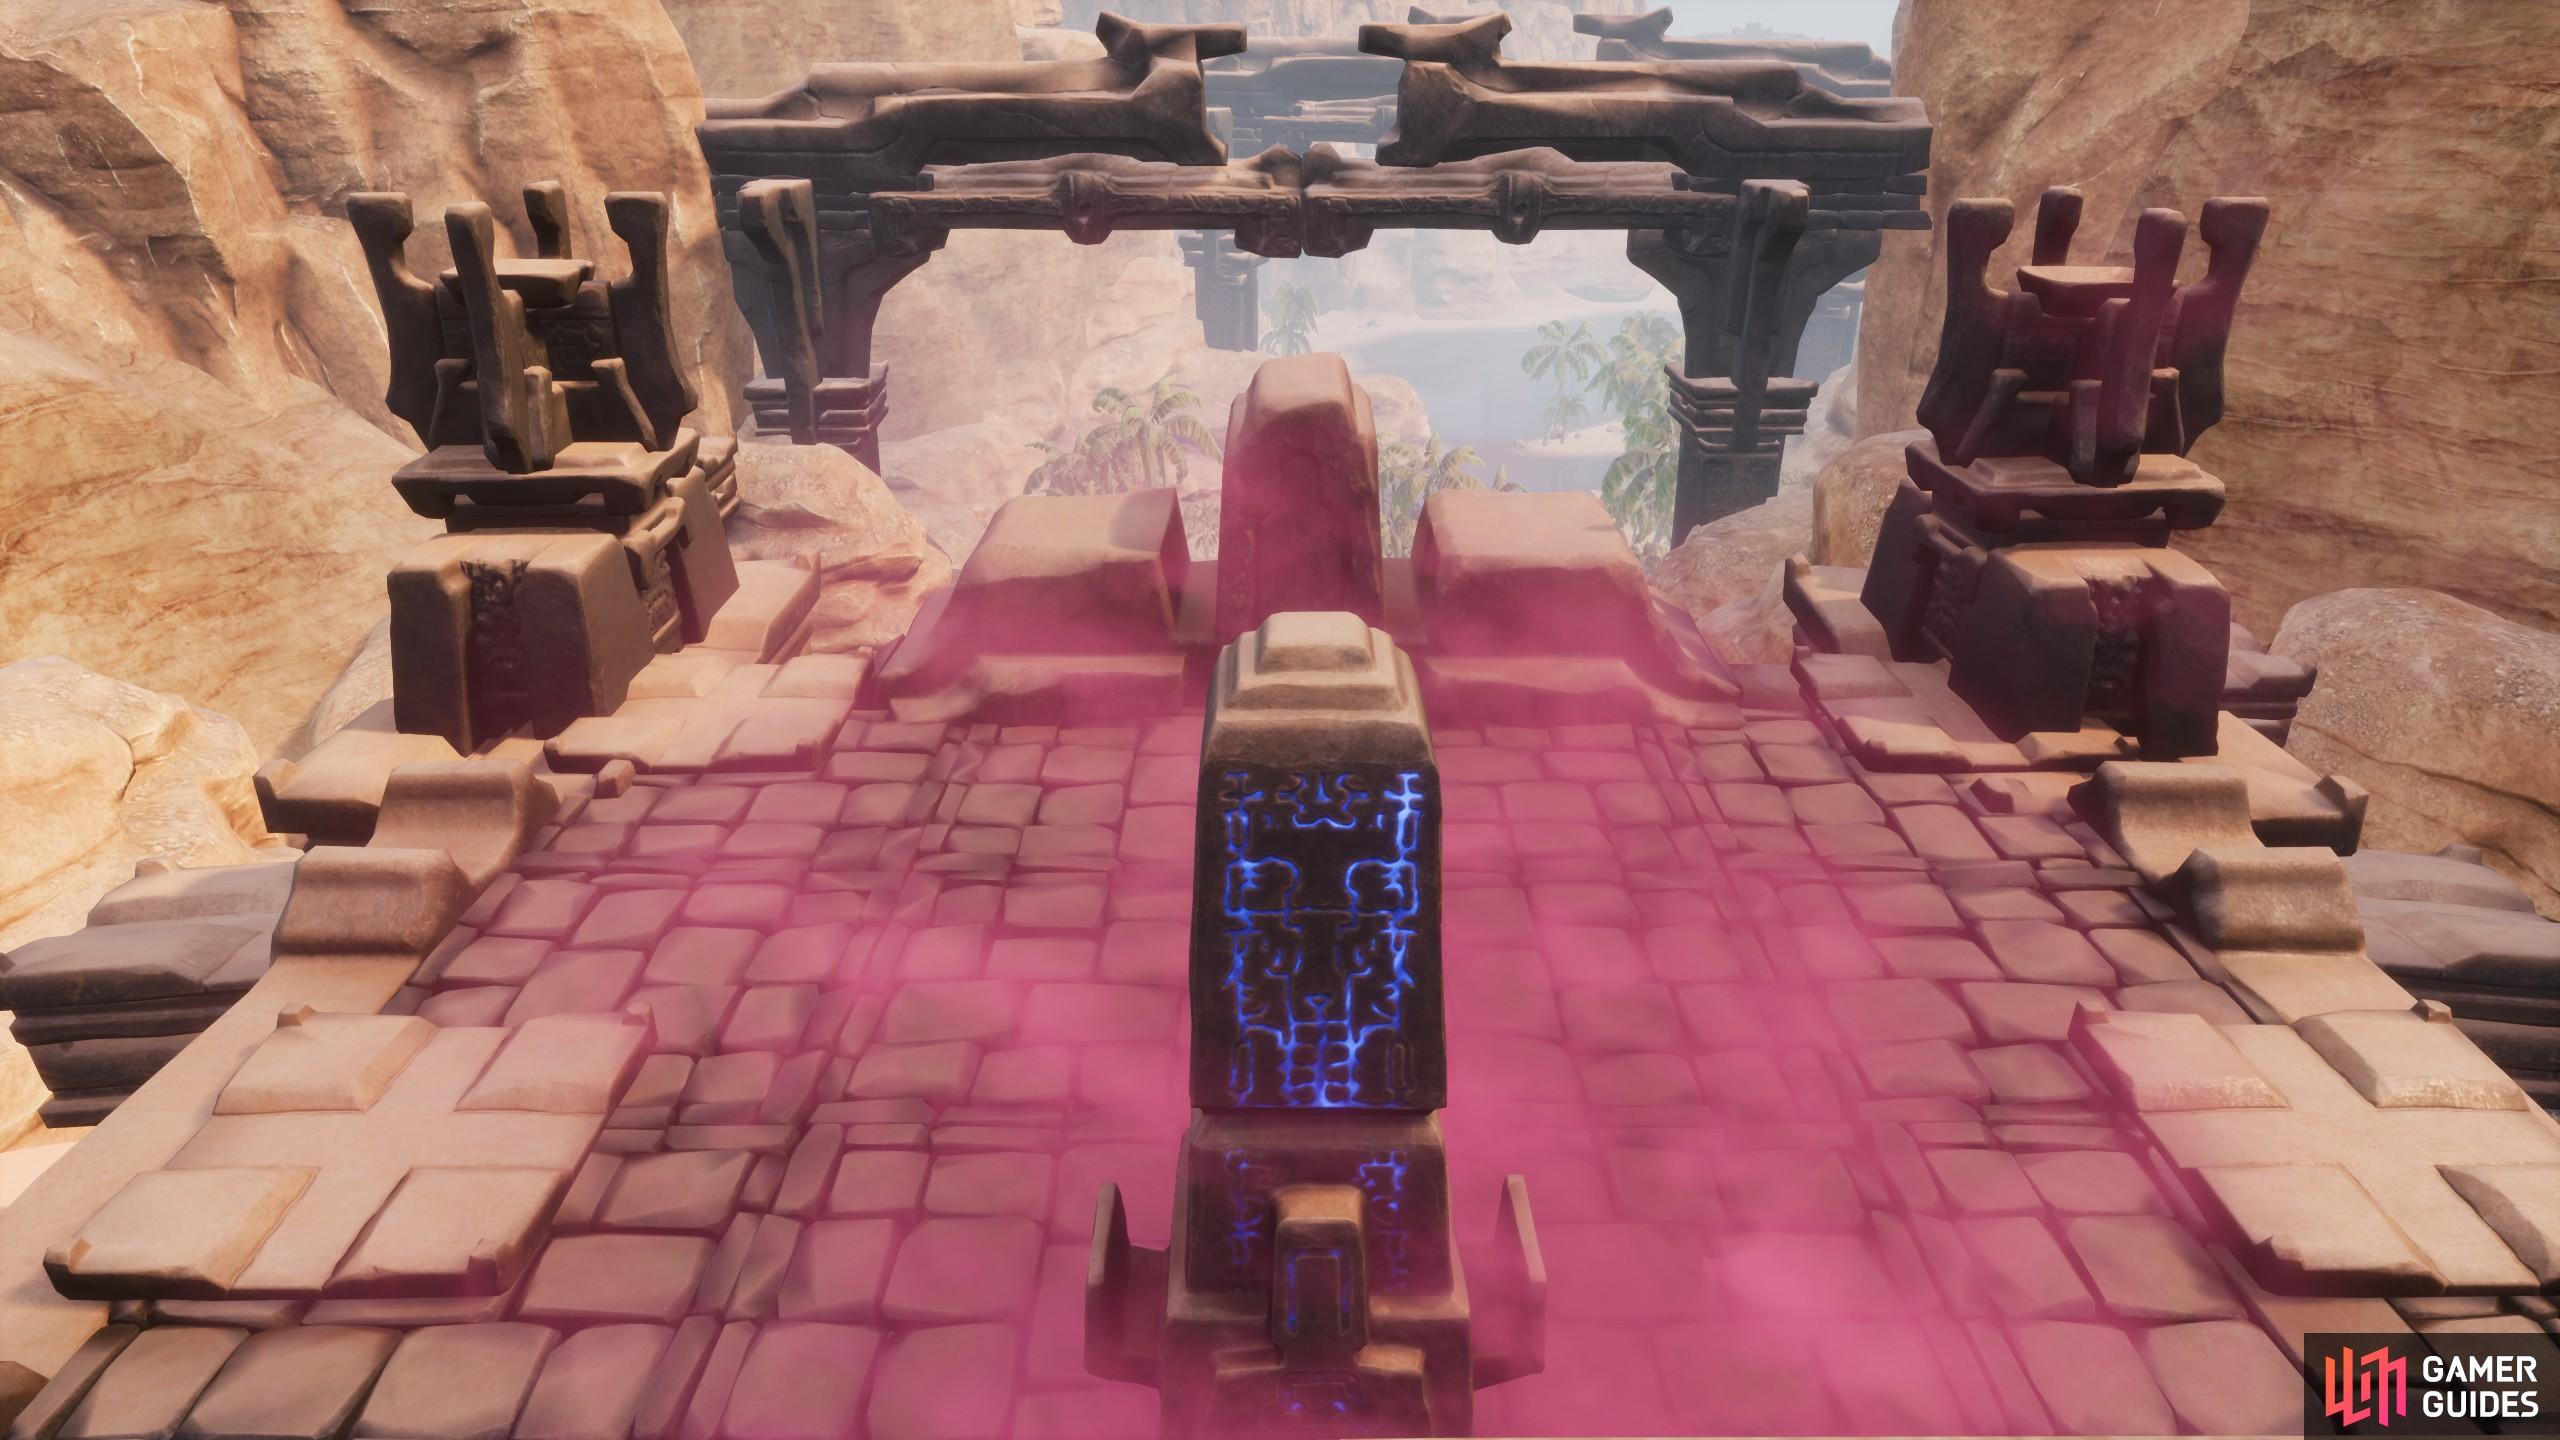 You can find Obelisks all around the map, just like this one located in The Dregs.